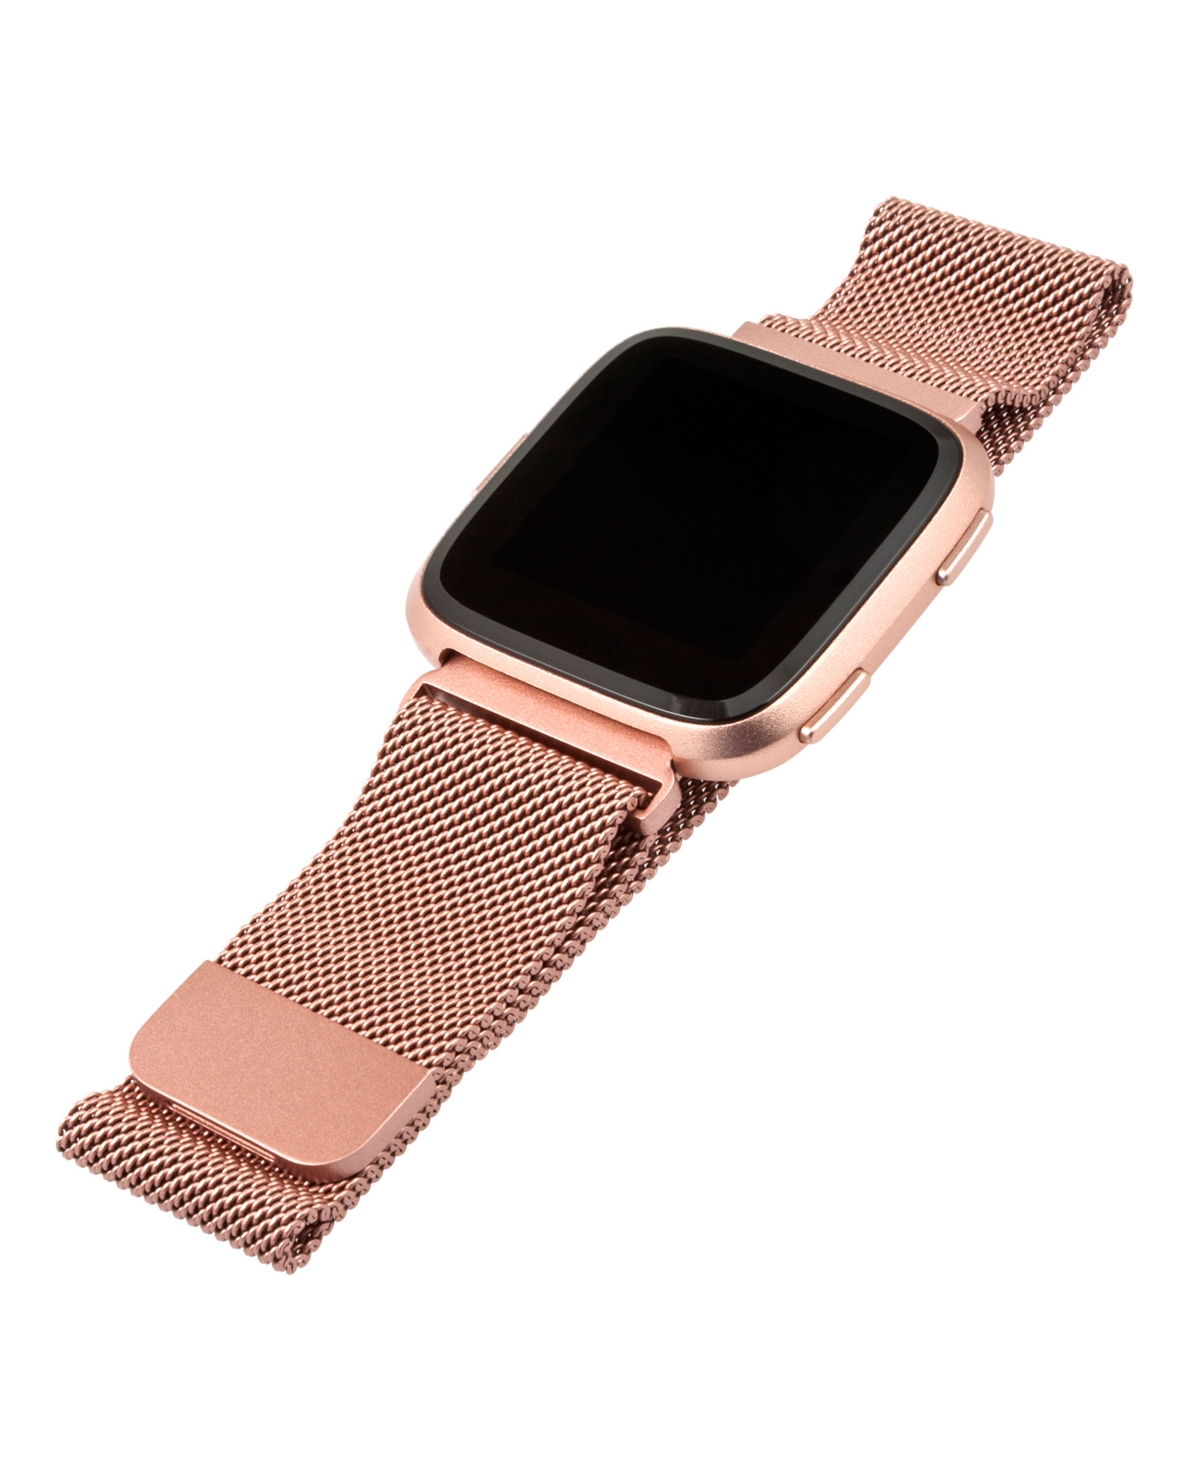 Rose Gold-Tone Stainless Steel Mesh Band Compatible with the Fitbit Versa and Fitbit Versa 2 - Rose Gold-Tone